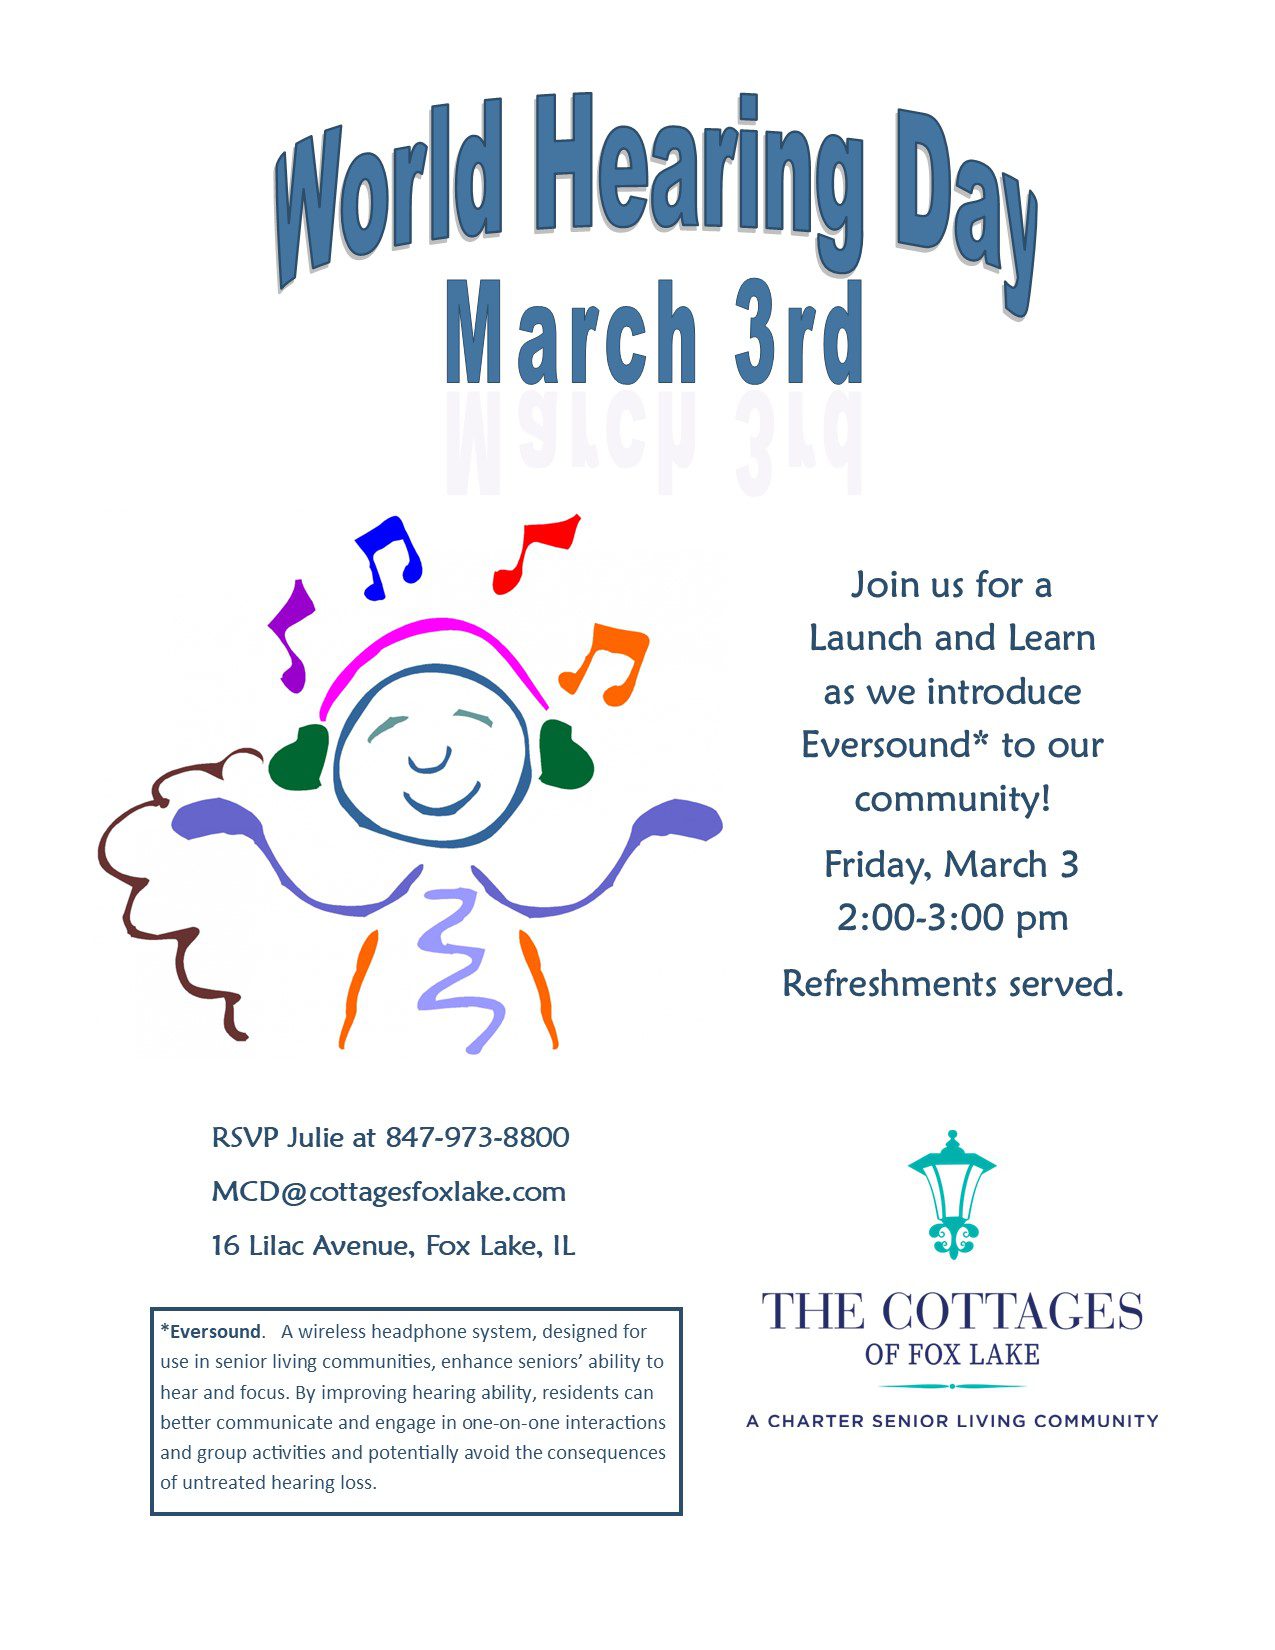 Cottages of Fox Lake - Assisted Living and Memory Care - World Hearing Day 2023